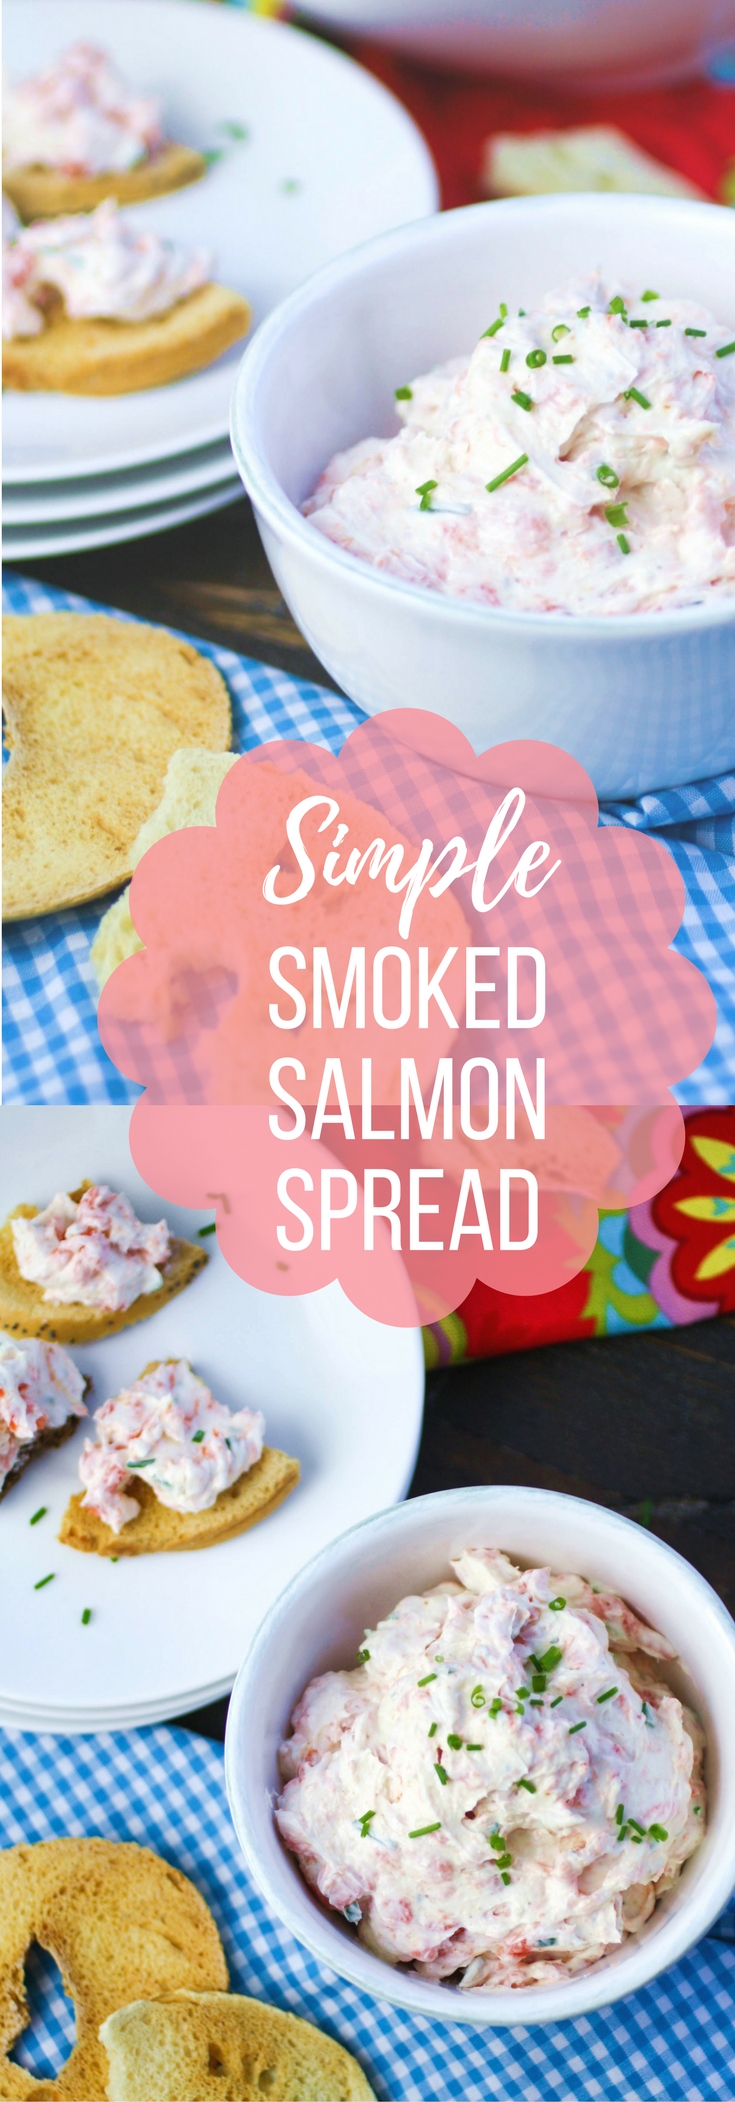 Simple Smoked Salmon Spread is a treat for any party. You'll love this creamy smoked salmon spread whenever you serve it!